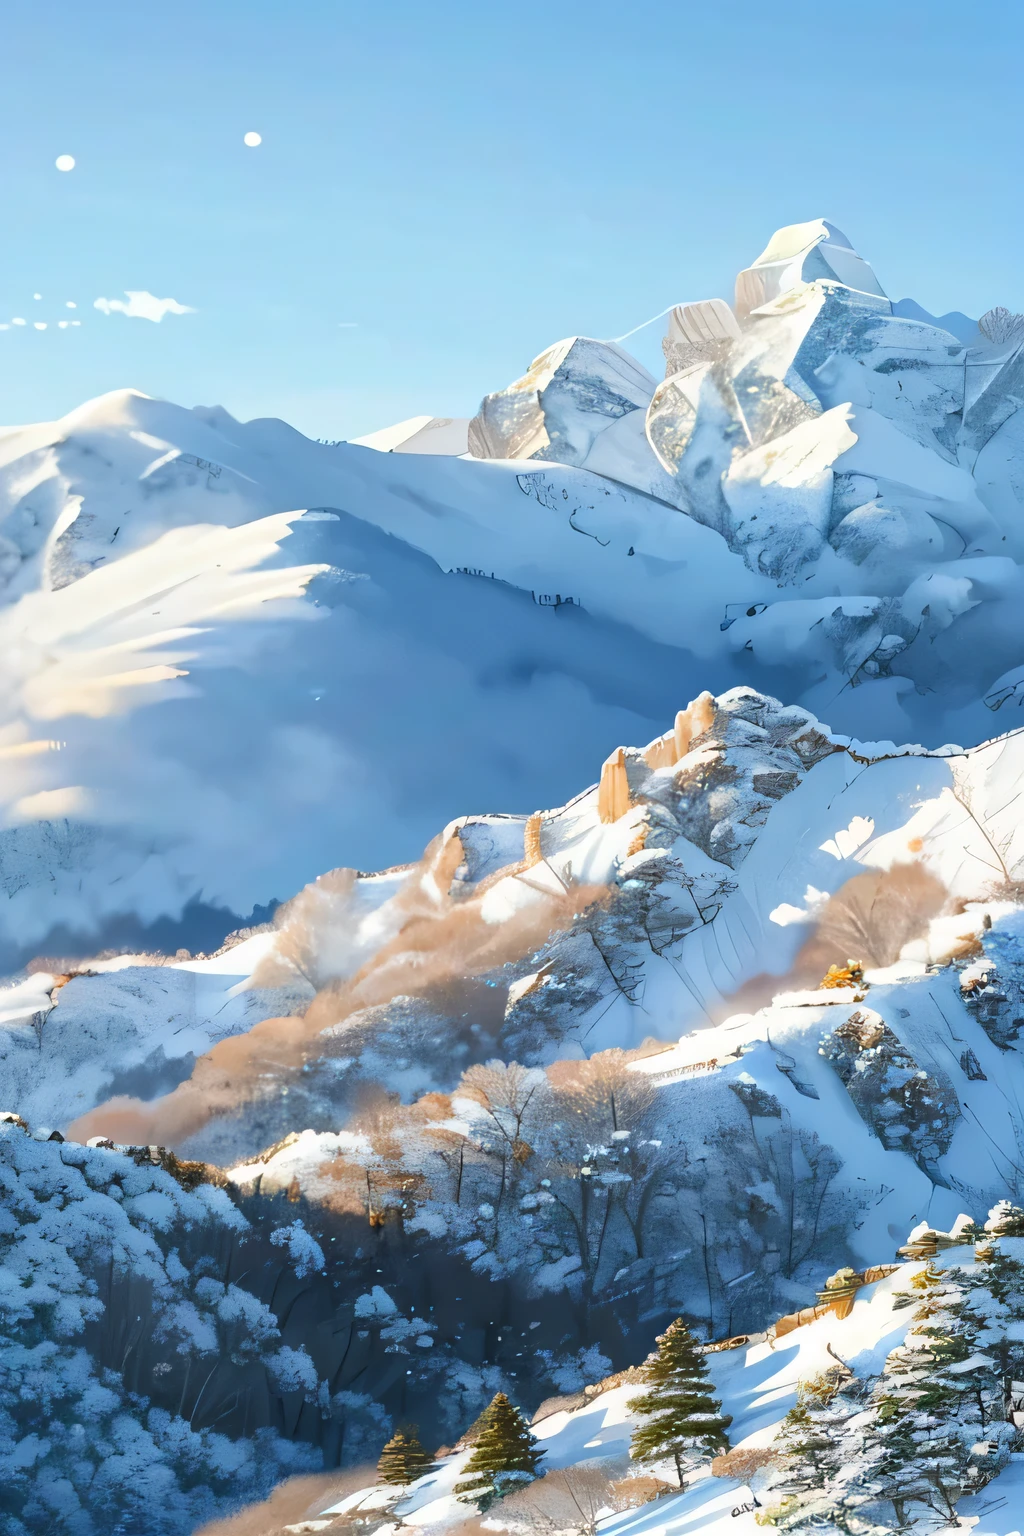 Snowy mountains are quiet：
Continuous mountains，covered with thick white snow，Presenting a silent snow scene。the peaks are towering，It is as if connected to heaven and earth，Showing the magnificence and solemnity of the snow-capped mountains。